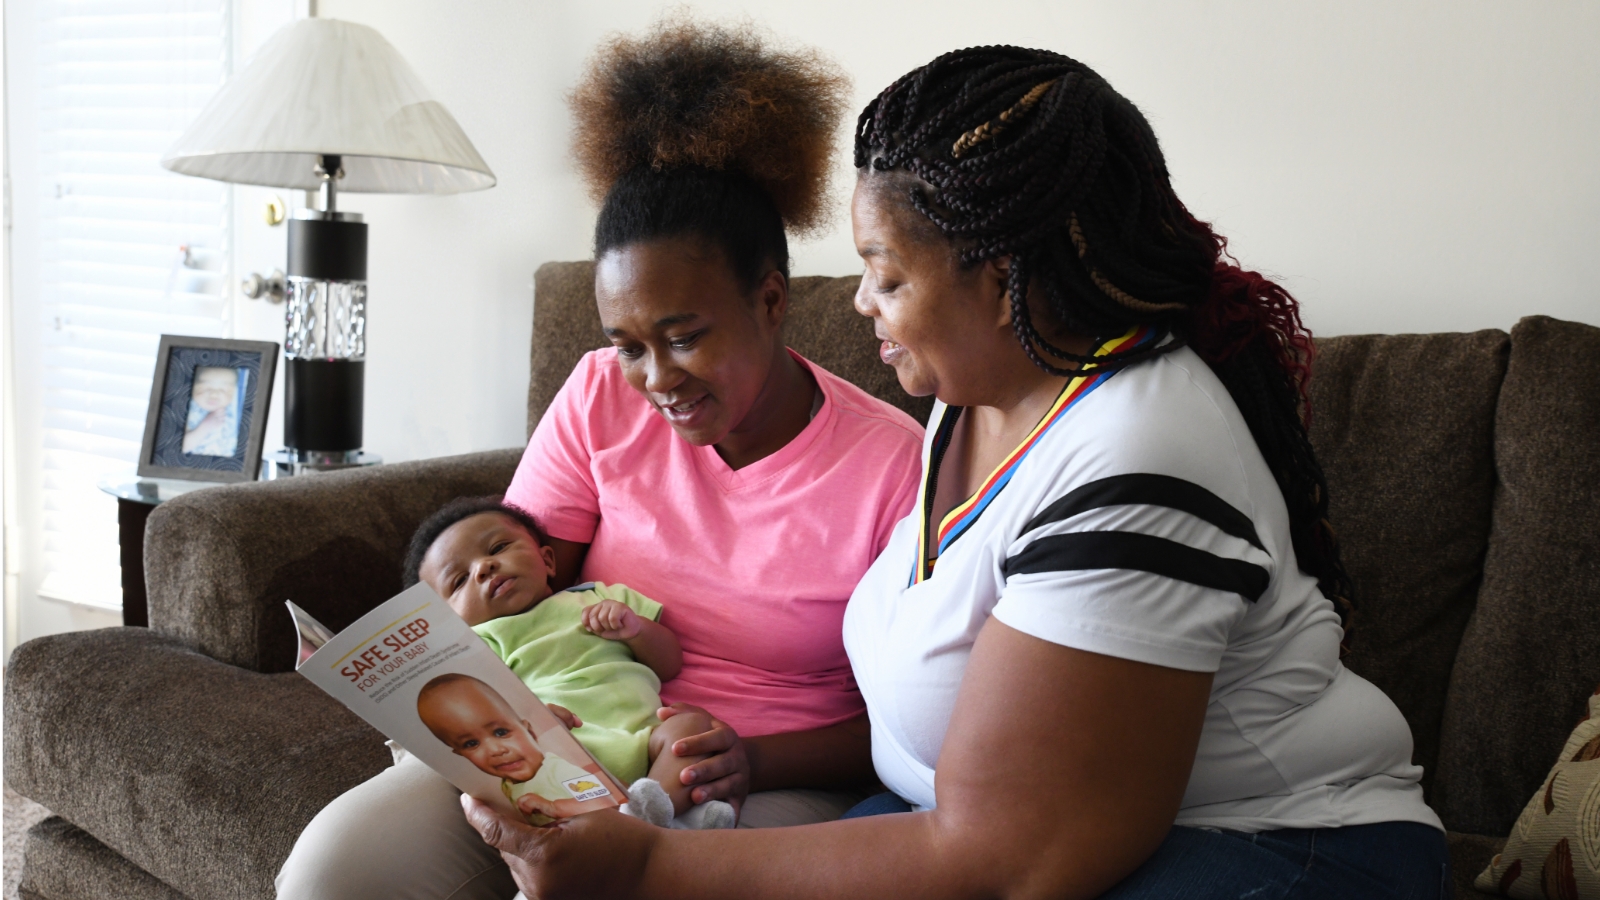  A mother (left) is holding a baby in her arms while another woman (right) reads a pamphlet with her